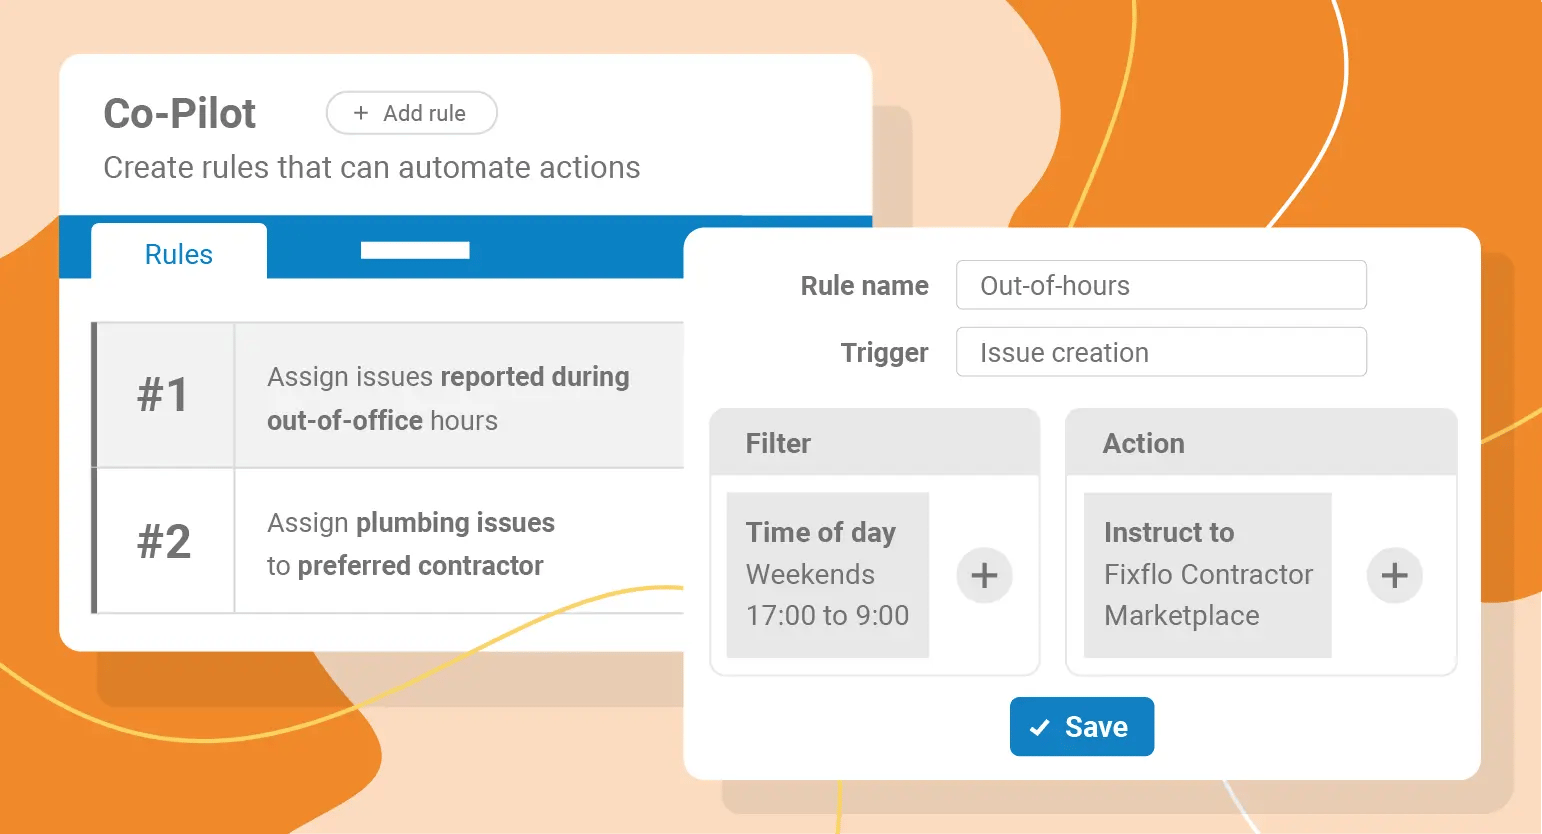 An illustration of Fixflo's Co-pilot feature where users can create rules that can automate actions